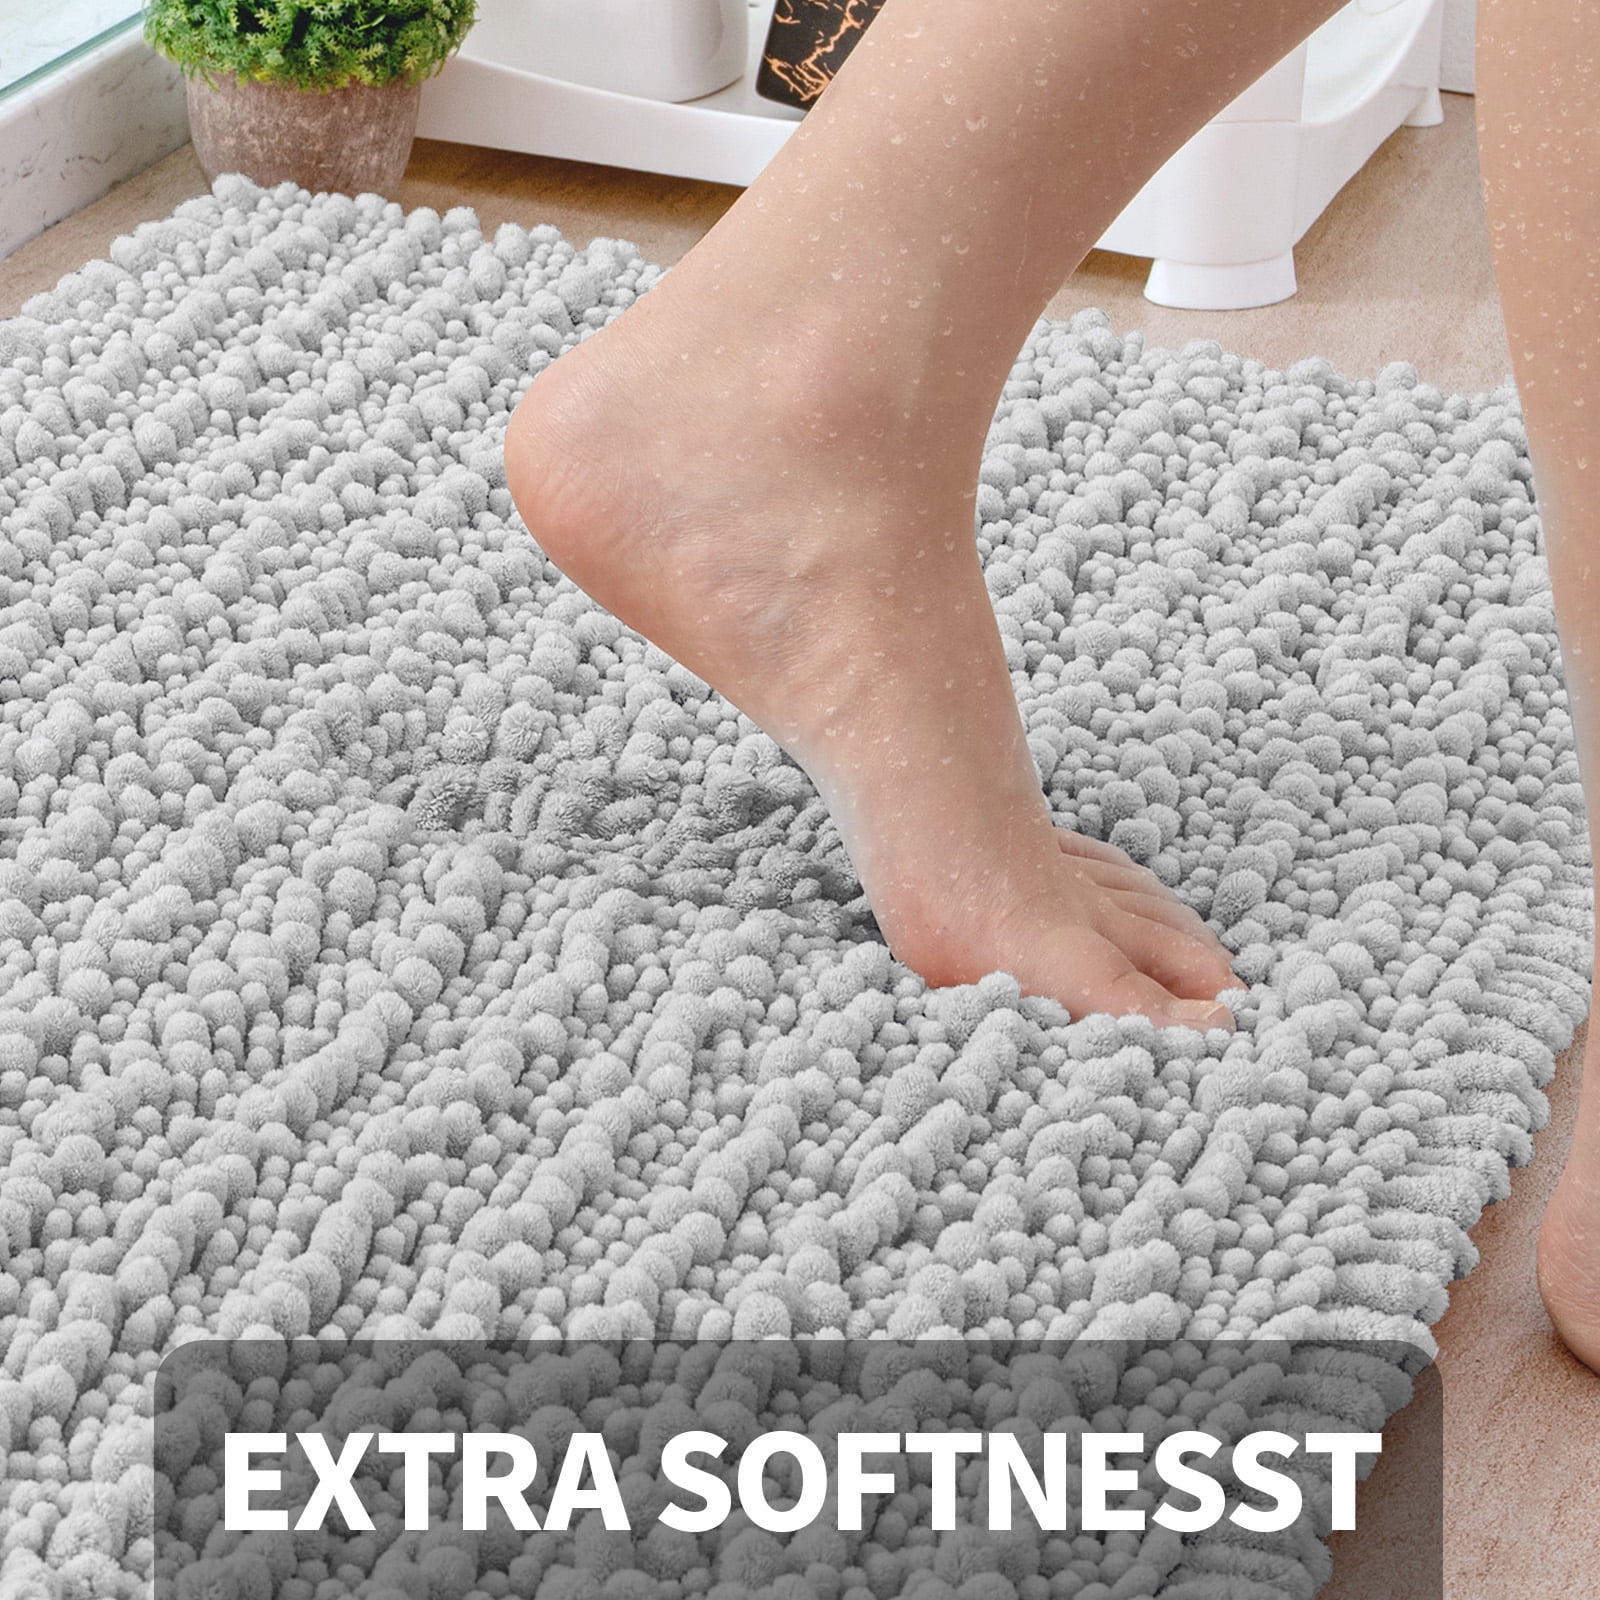 Color&Geometry White Chenille Bathroom Rugs- Non Slip, Absorbent, Quick  Dry, Thin, Machine Washable- 16x24 Small Bath Mat Carpet Bath Rugs for